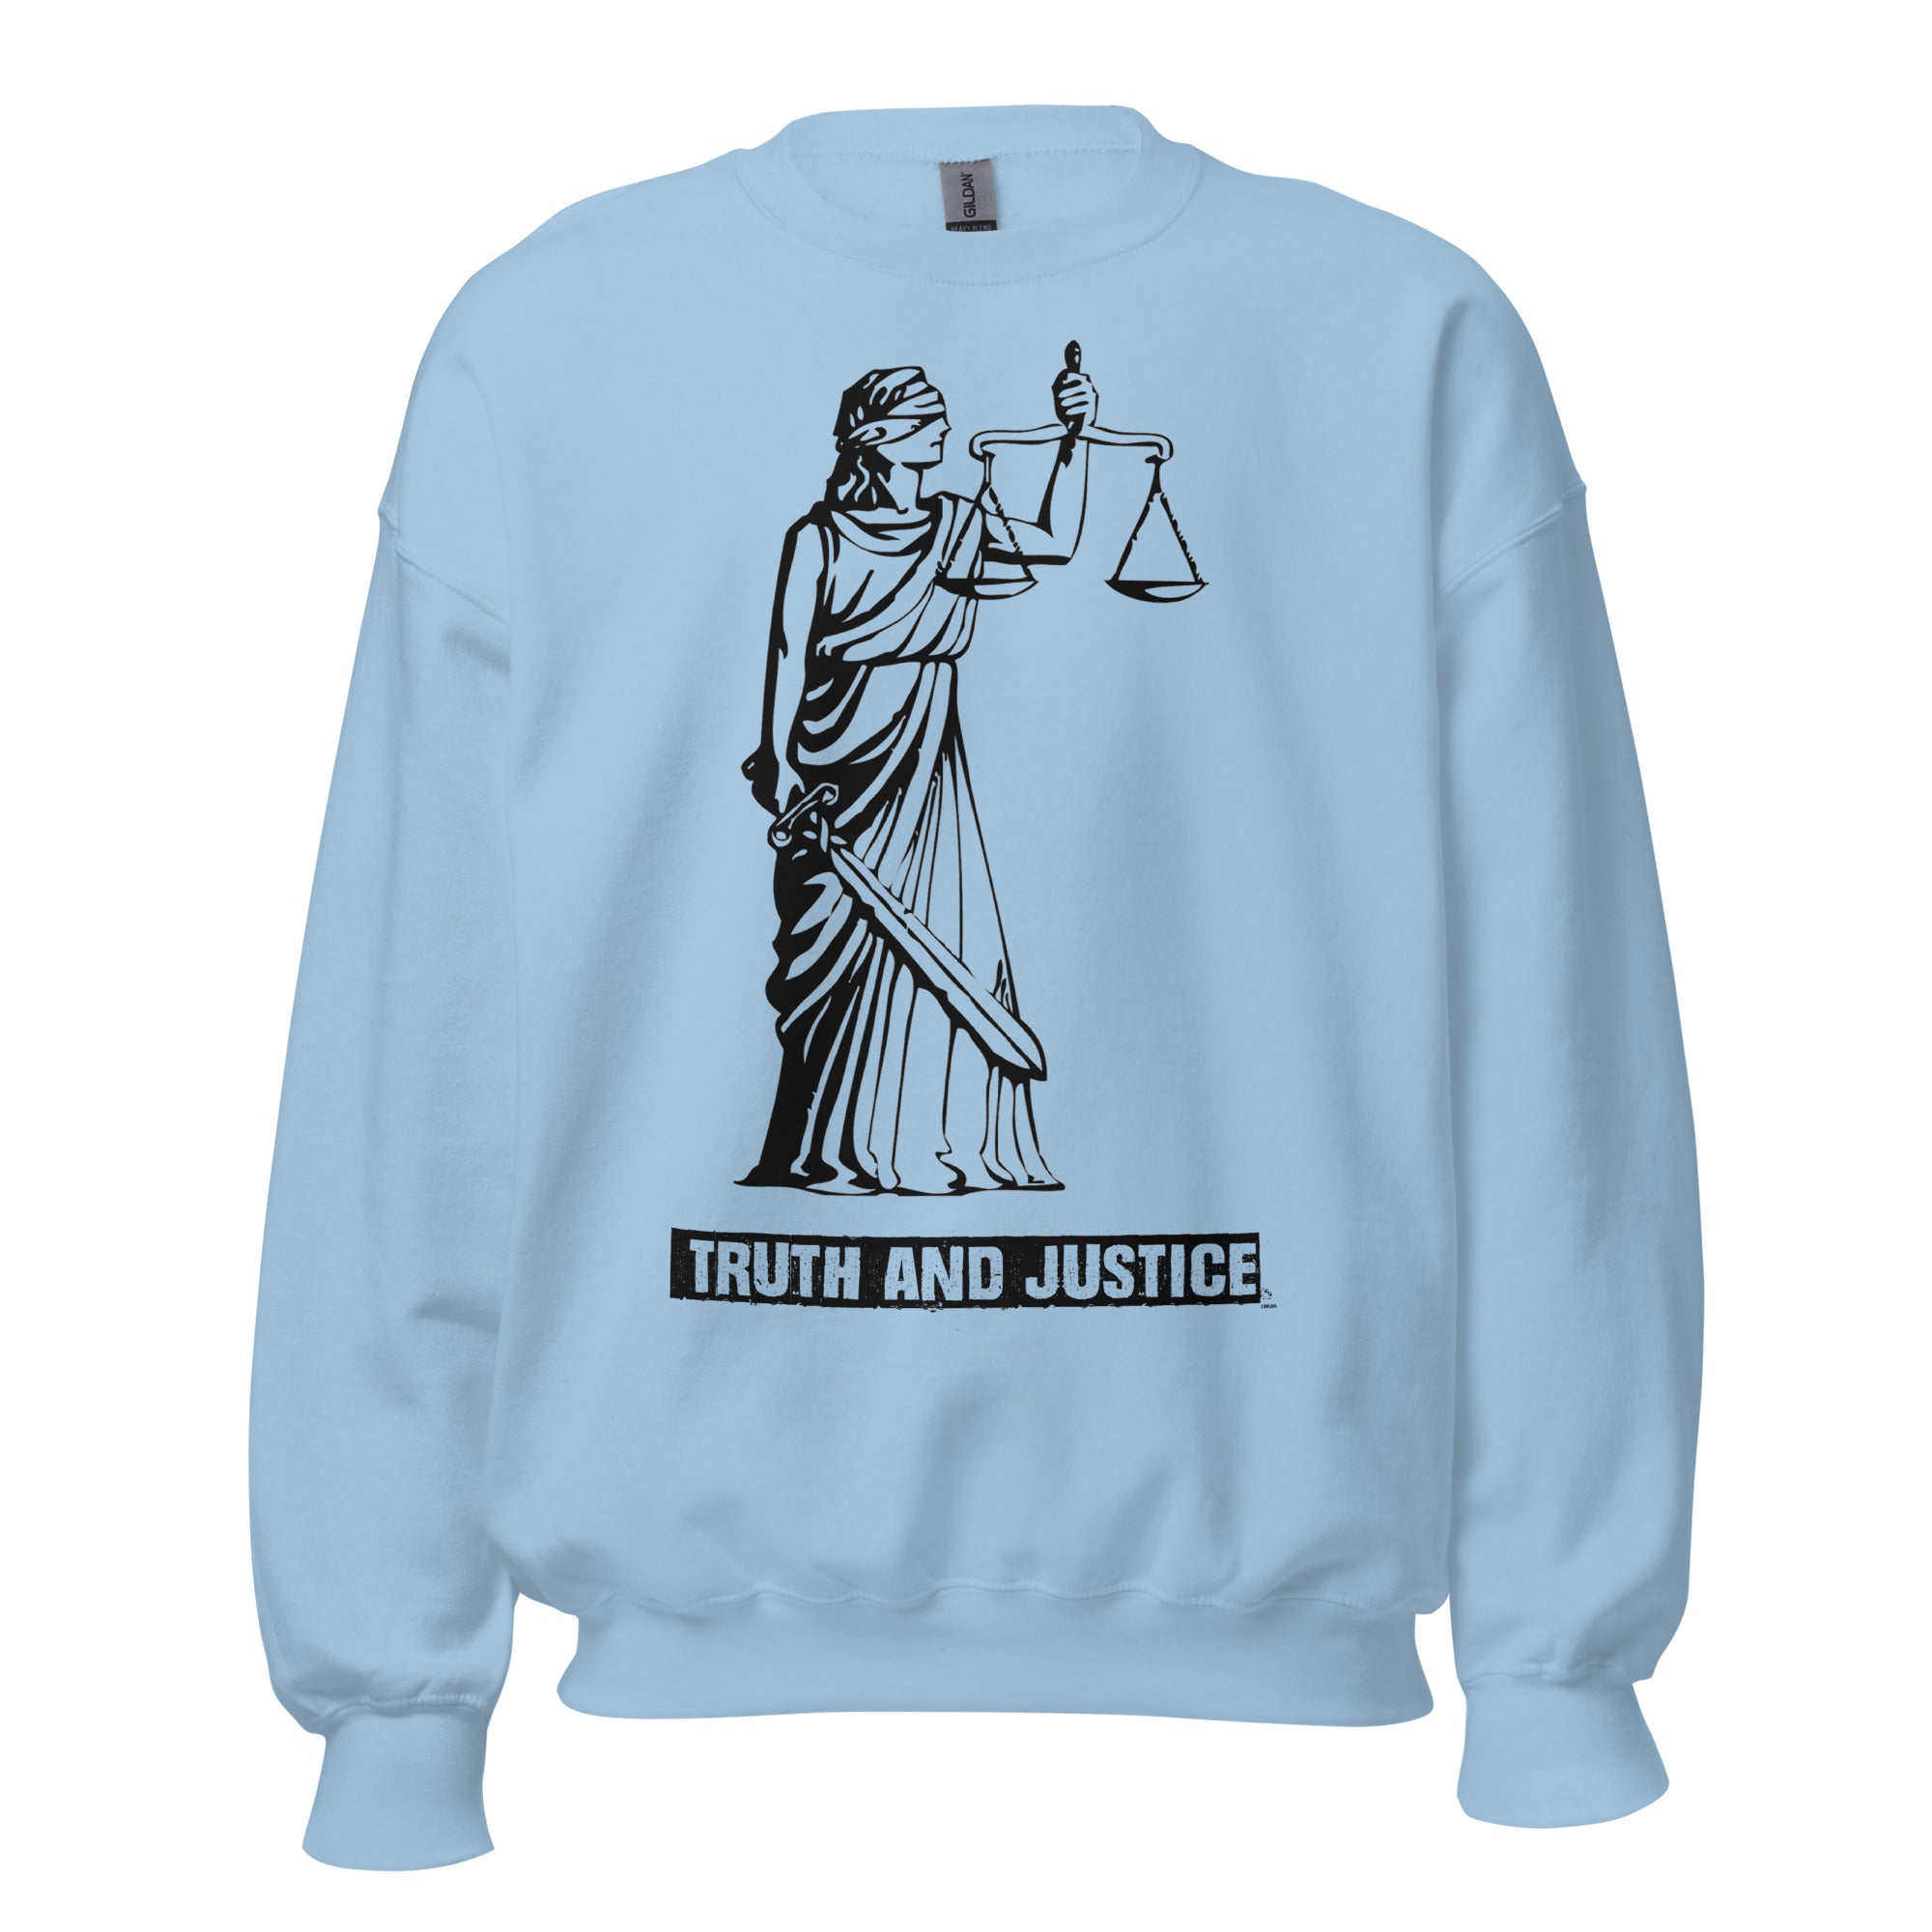 Unisex Crew Neck Sweatshirt - Truth And Justice - GRAPHIC T-SHIRTS